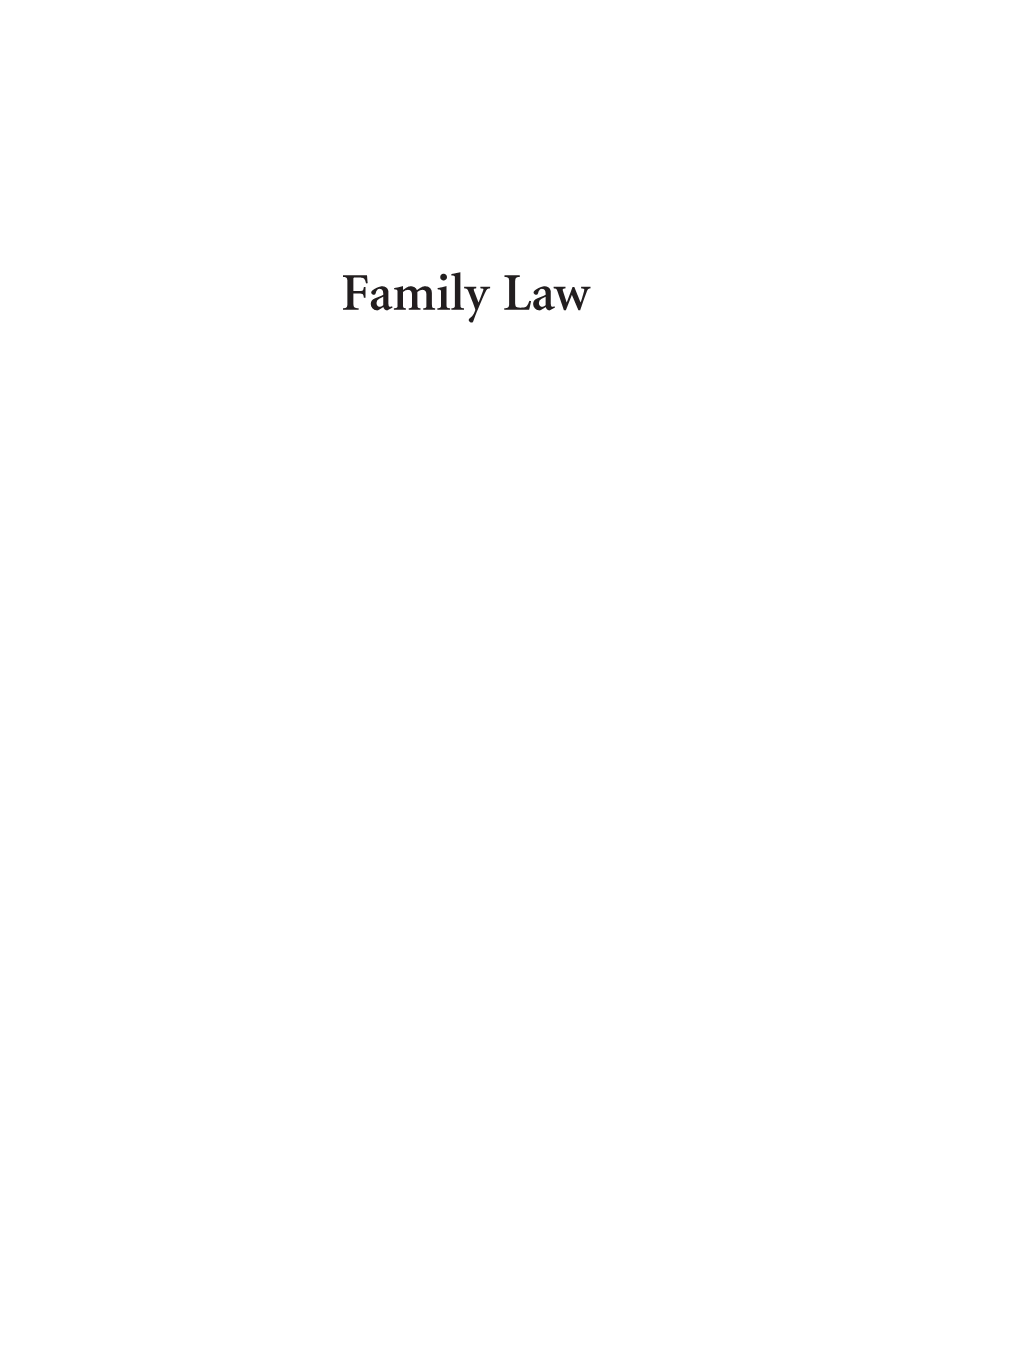 Family Law Berenson Fam Law 00 Fmt F2.Qxp 12/2/16 12:20 PM Page Ii Berenson Fam Law 00 Fmt F2.Qxp 12/2/16 12:20 PM Page Iii